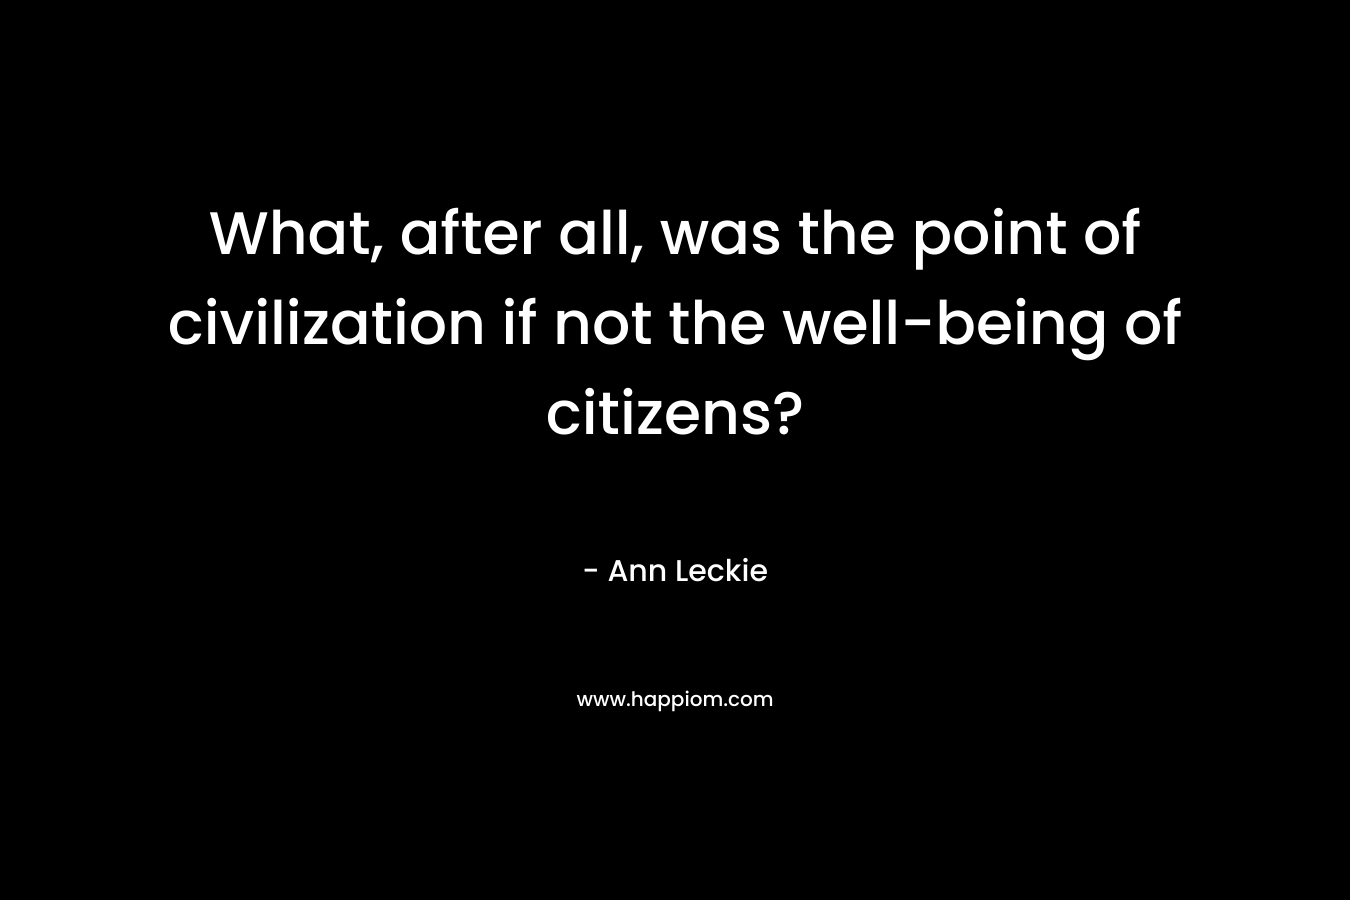 What, after all, was the point of civilization if not the well-being of citizens? – Ann Leckie